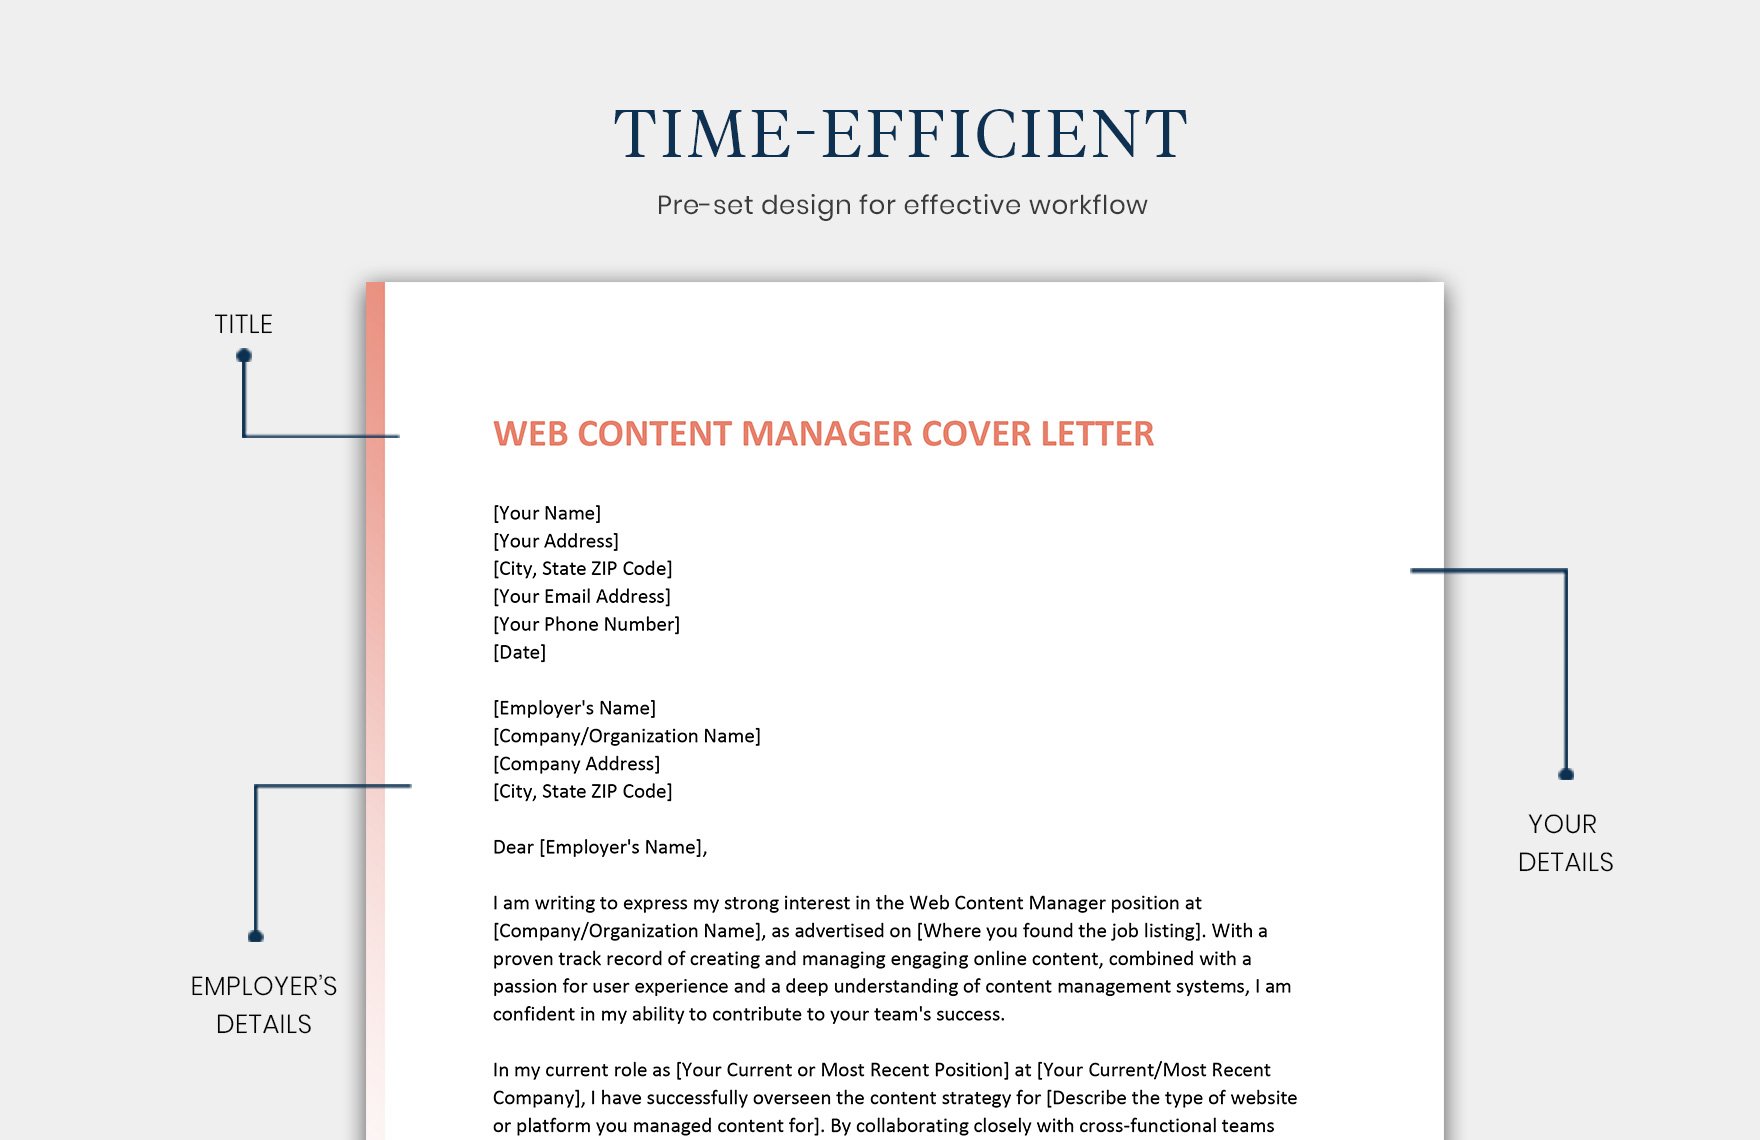 Web Content Manager Cover Letter